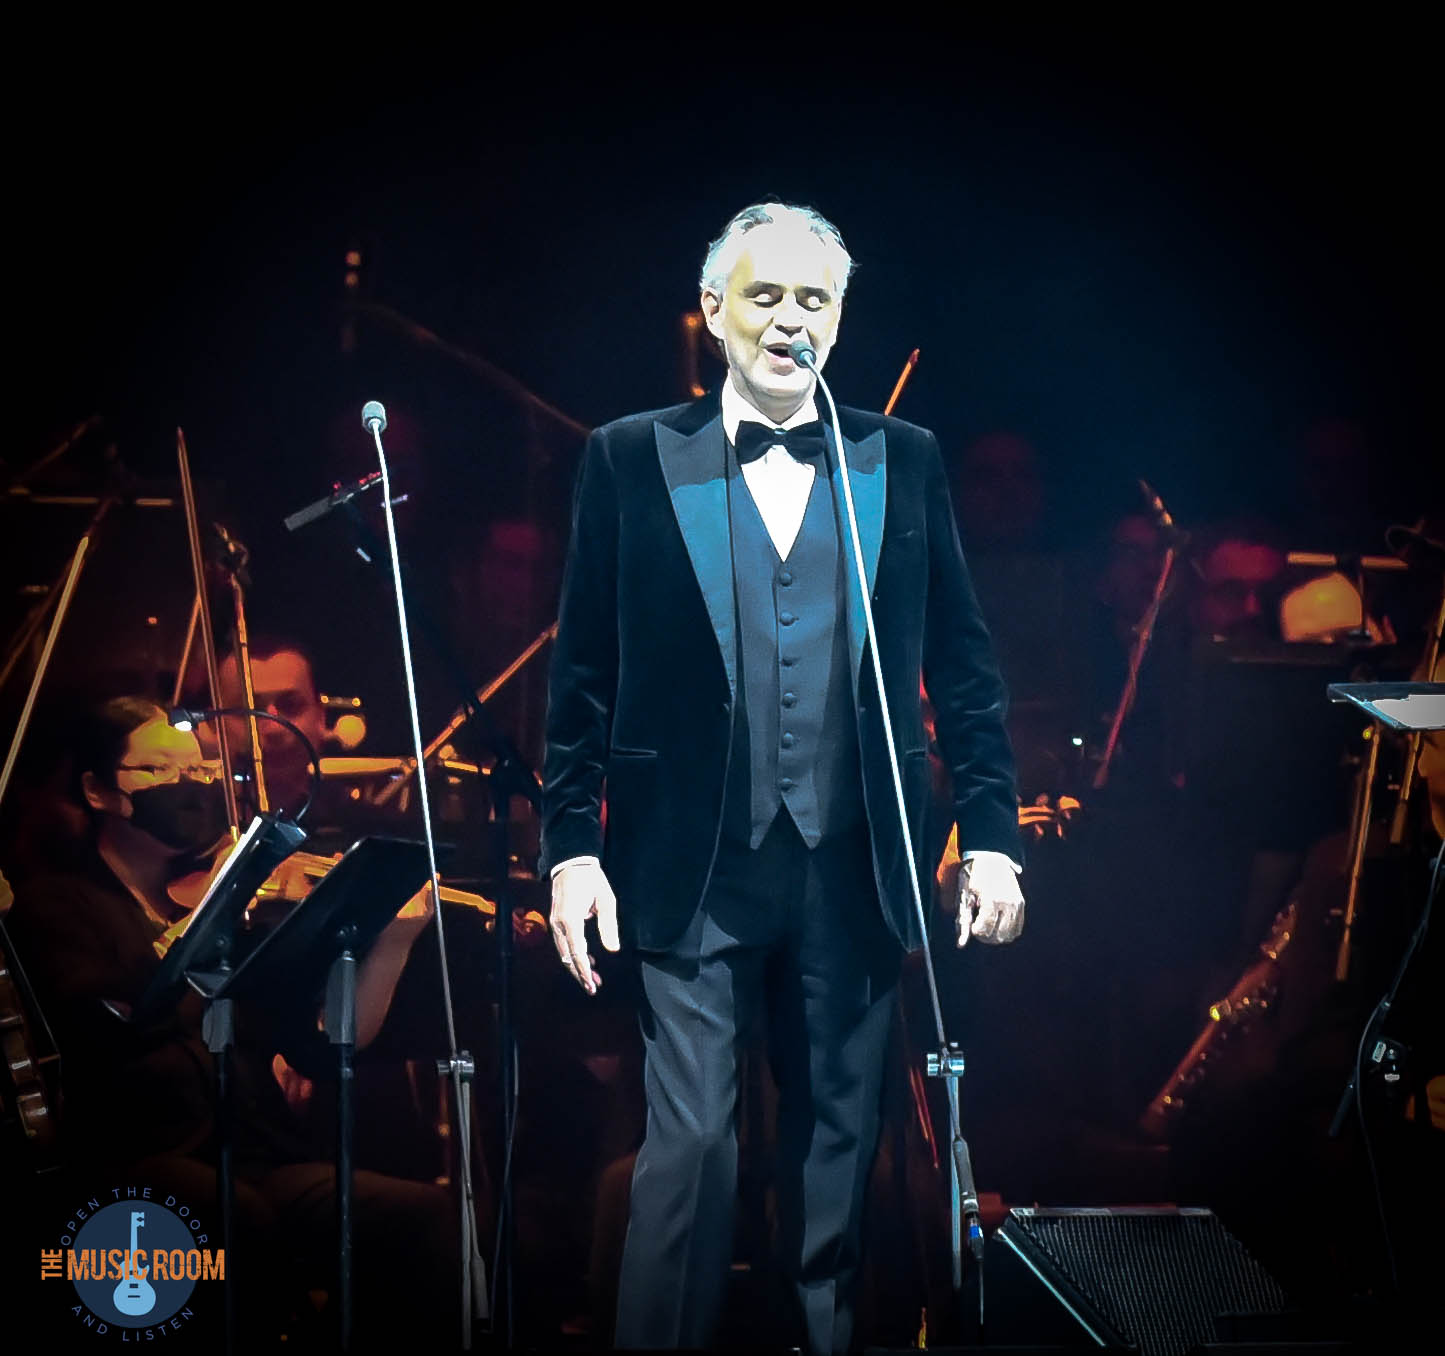 Andrea Bocelli takes to the stage alongside son Matteo, 24, and 10